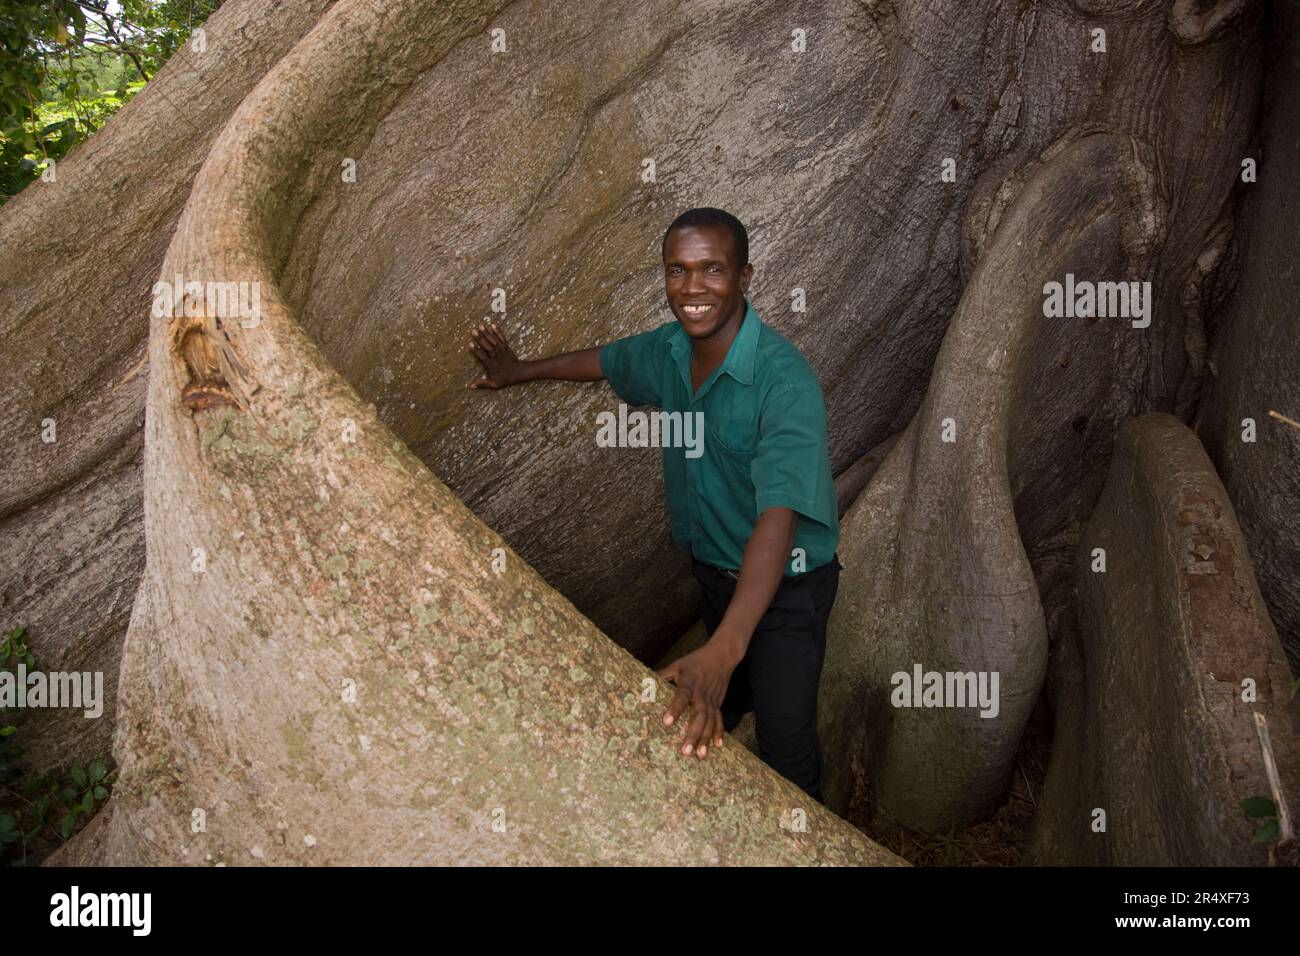 A tour guide next to the buttress roots of a ceiba tree. Stock Photo